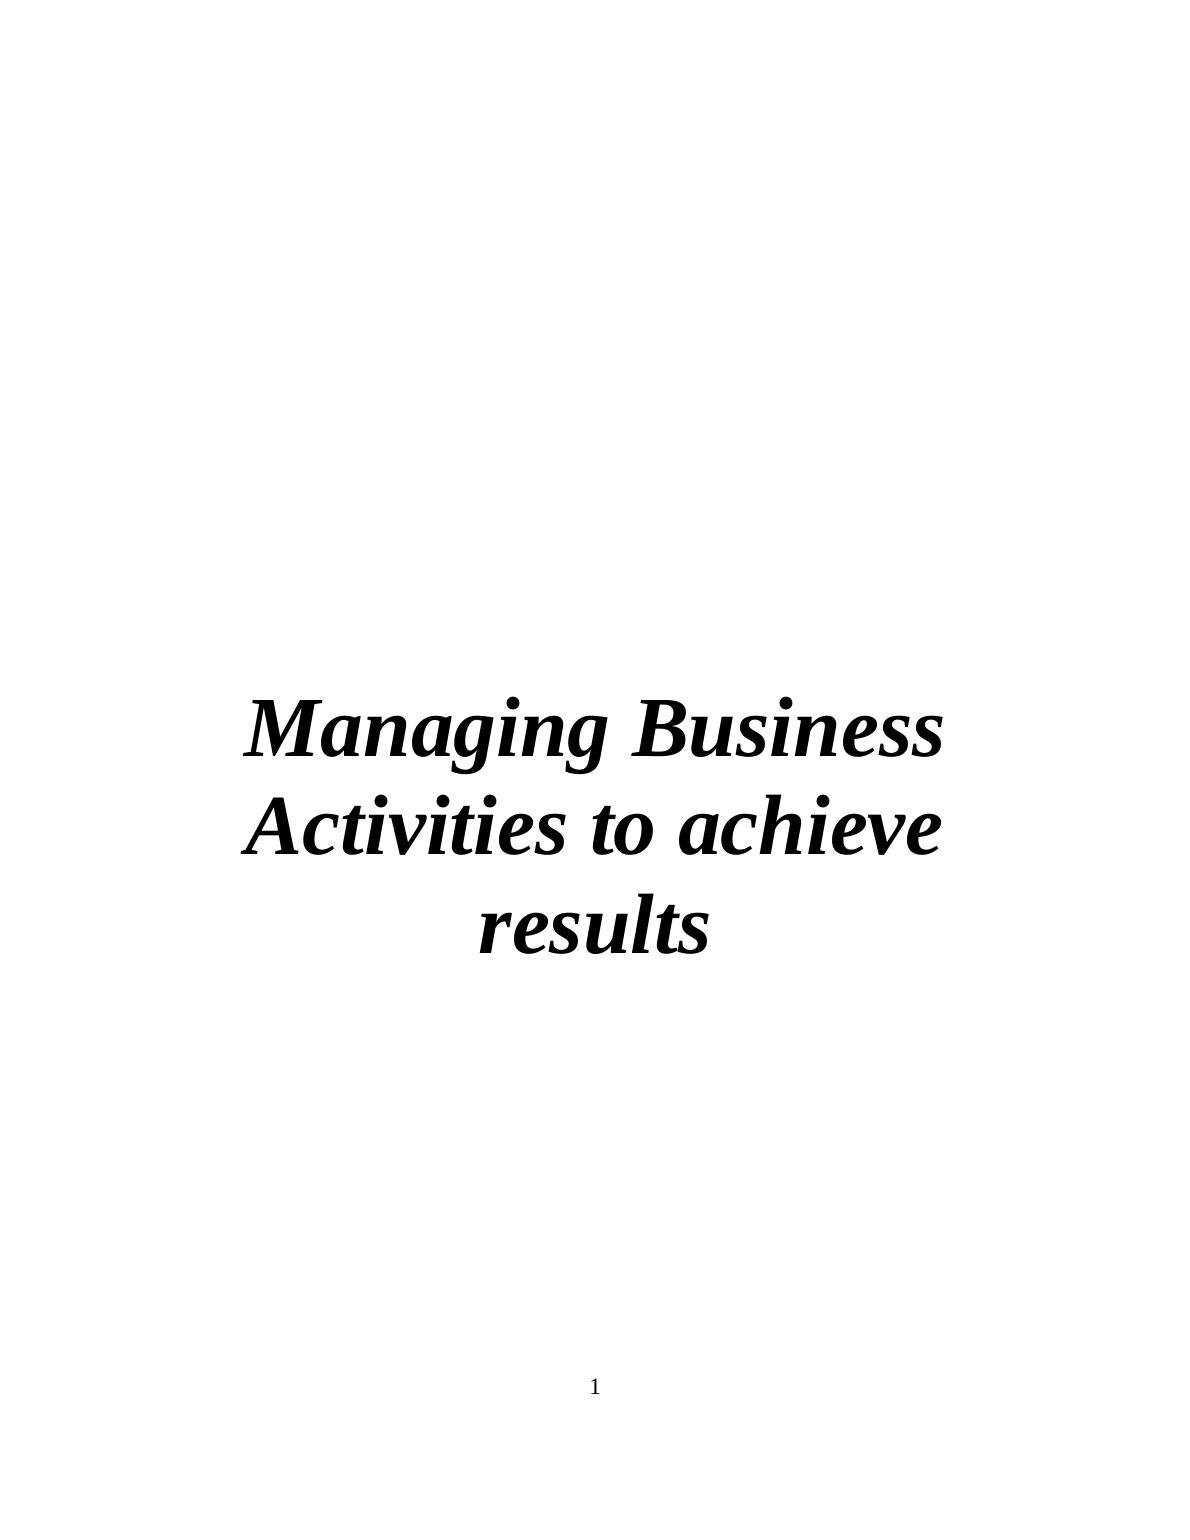 Managing Business Activities in ABC company | Report_1